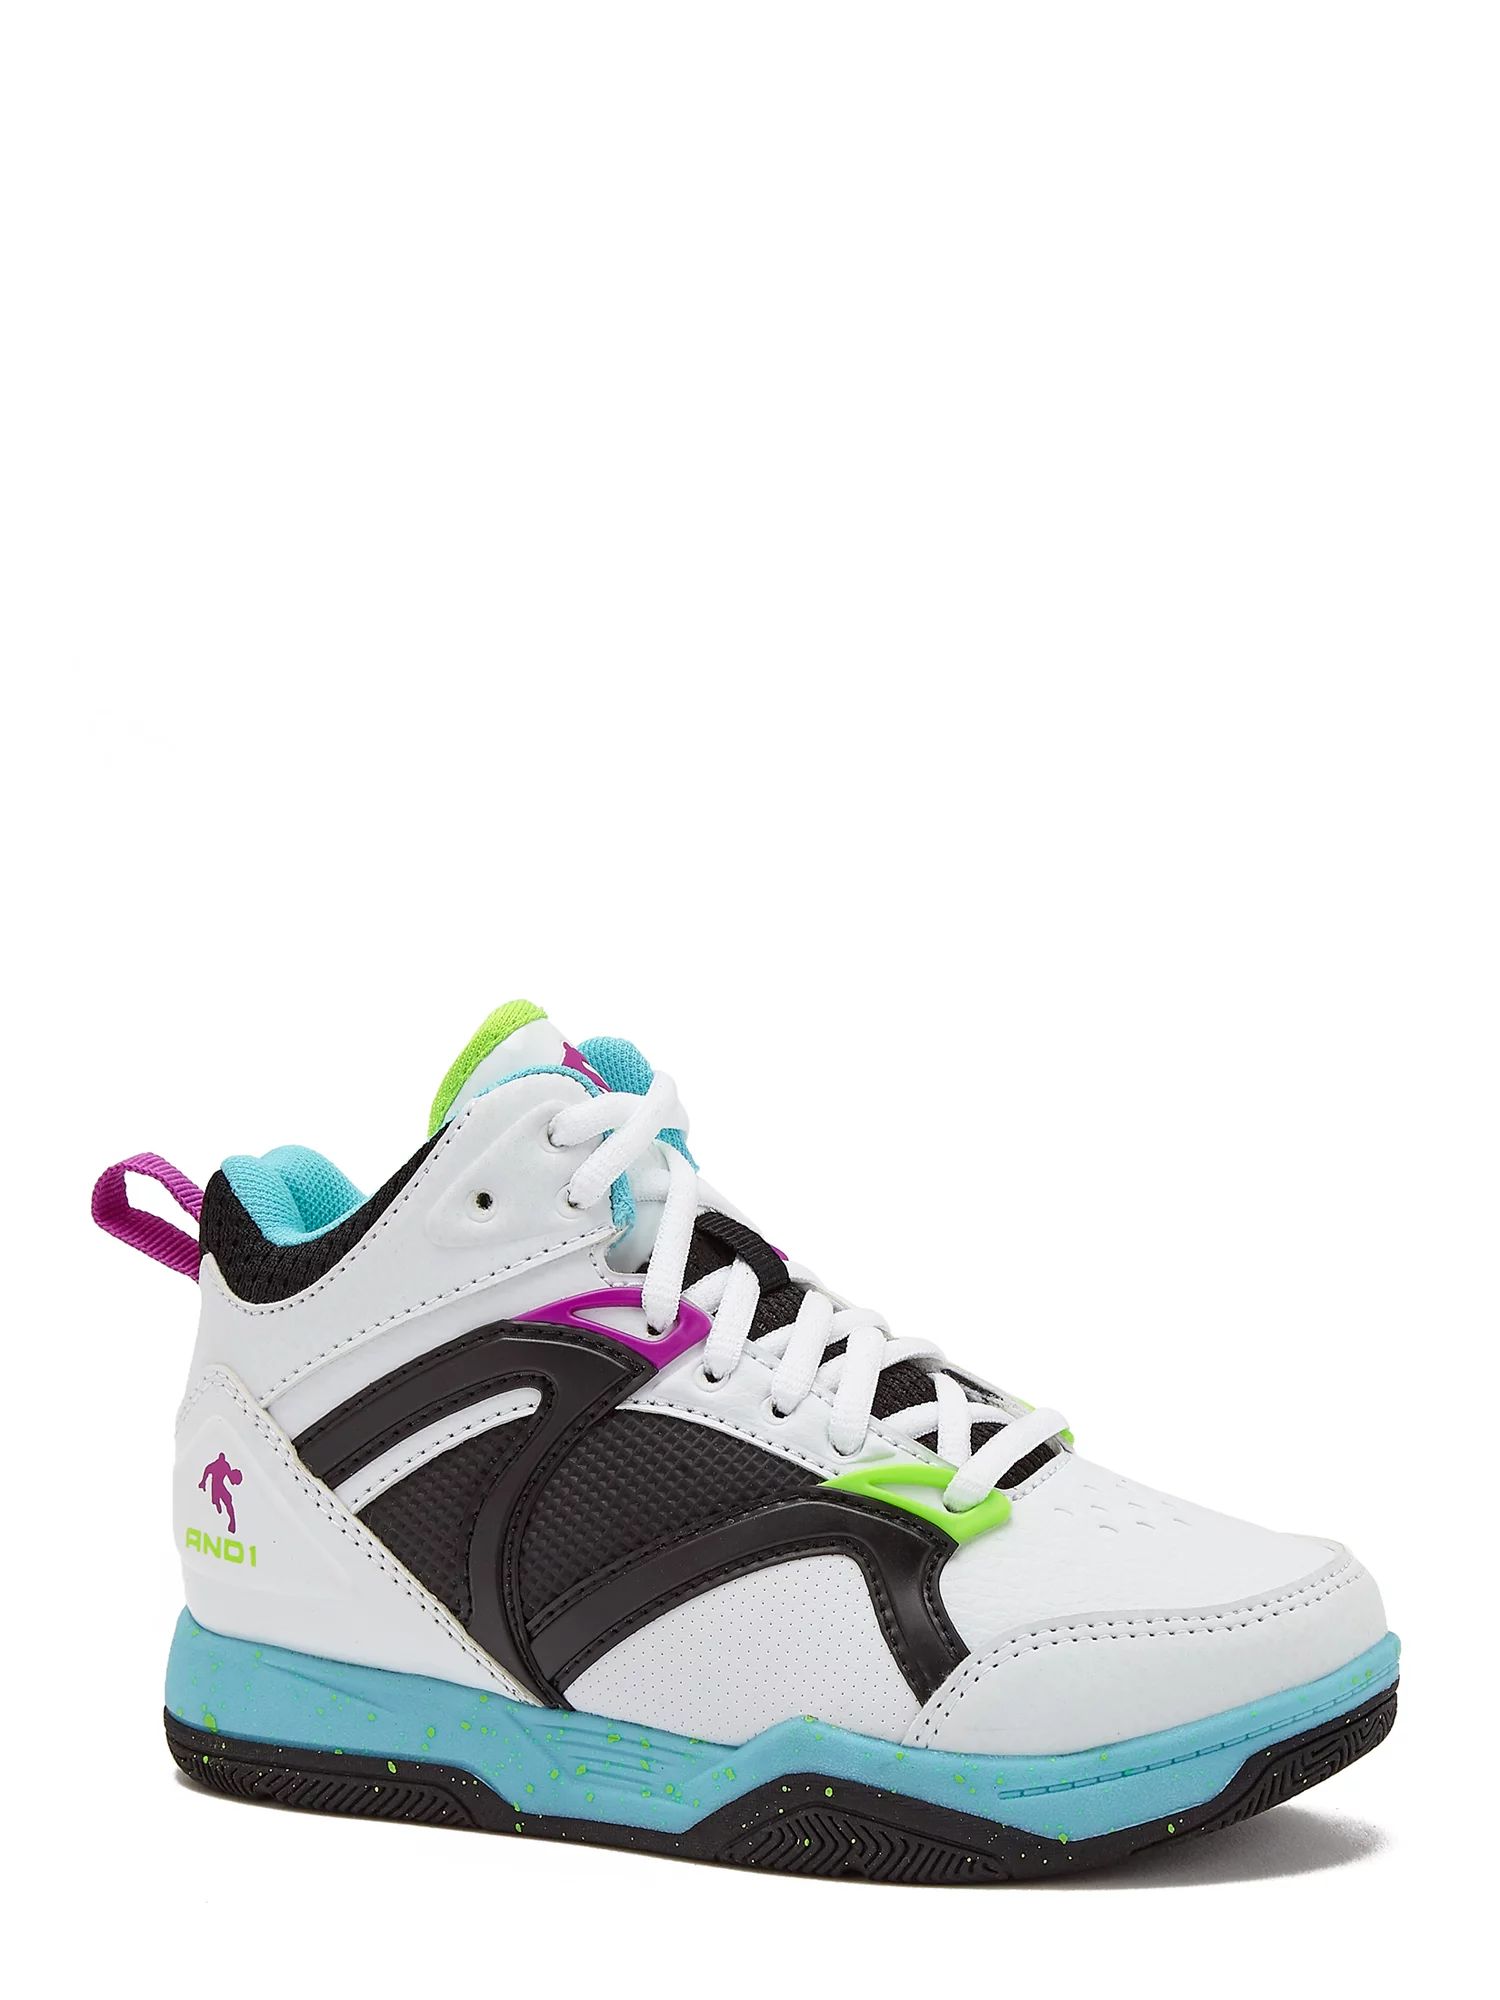 AND1 Little & Big Boys Lace-up Basketball Sneakers, Sizes 13-6 | Walmart (US)